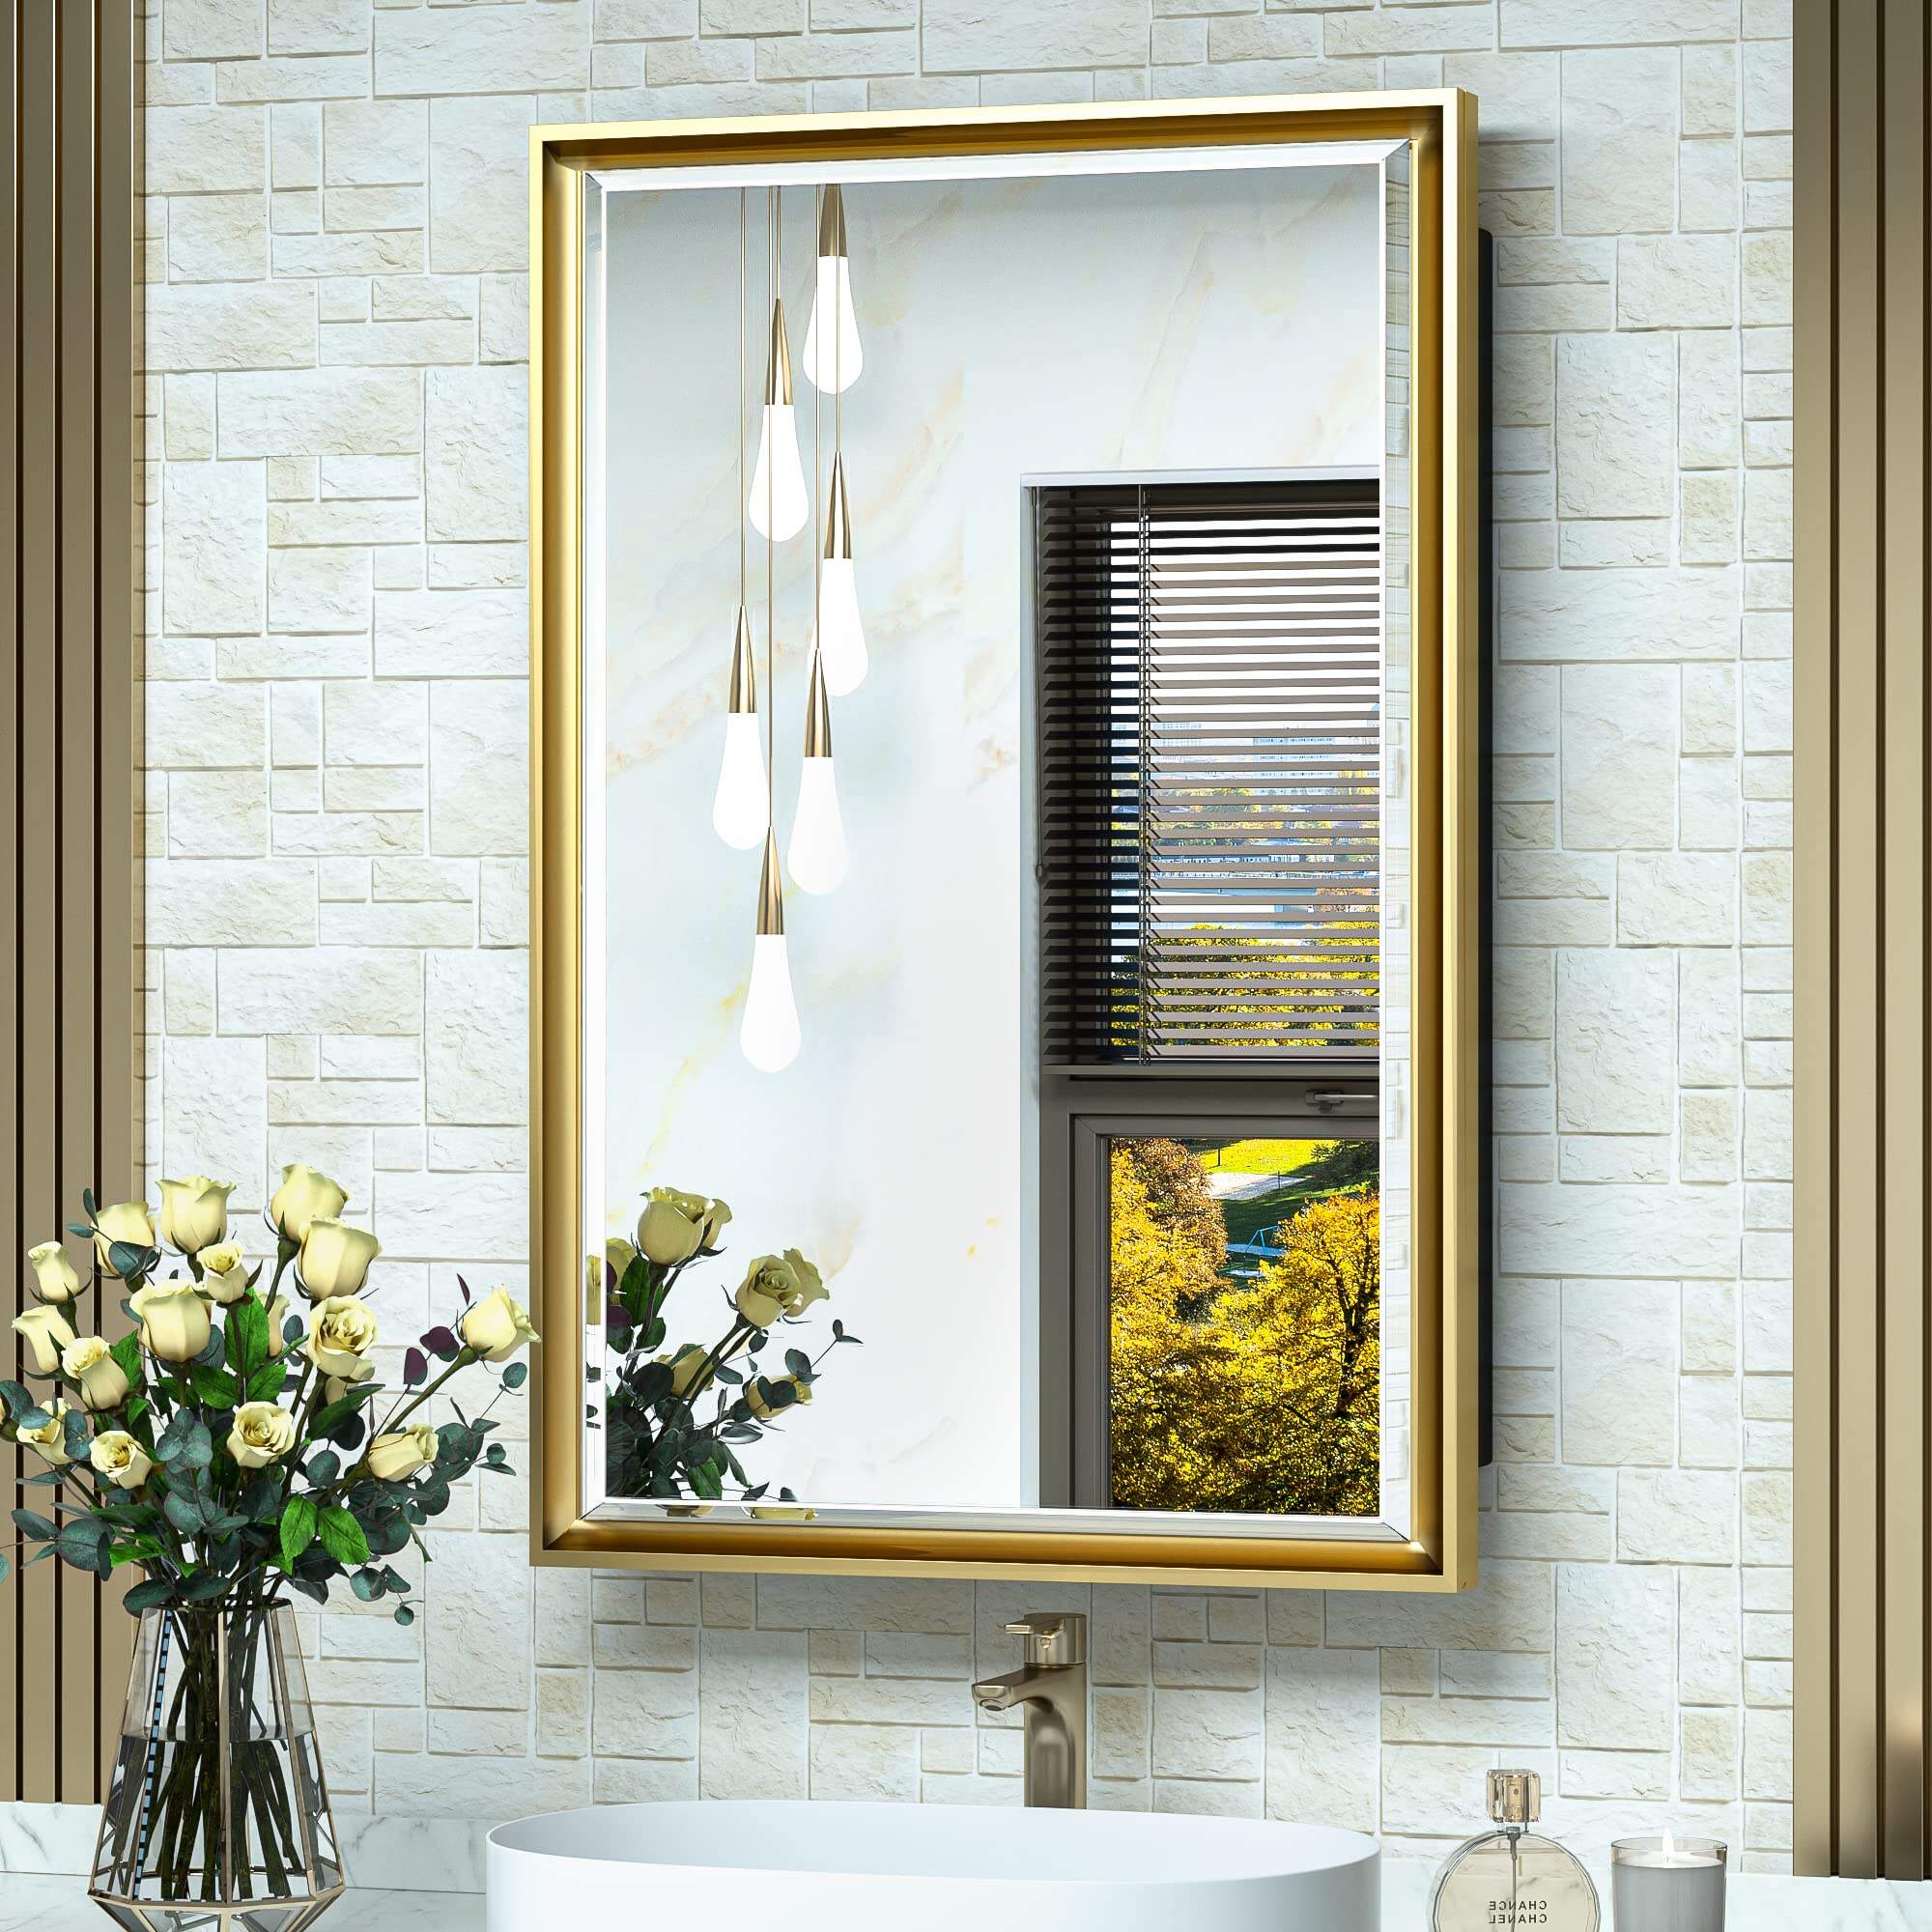 Foshan Haohan Smart Home Co., Ltd. Recessed Medicine Cabinet 16x24 in Bathroom Vanity Mirror Gold Metal Framed Surface Wall Mounted with Aluminum Alloy Beveled Edges Design 1 Door for Modern Farmhouse